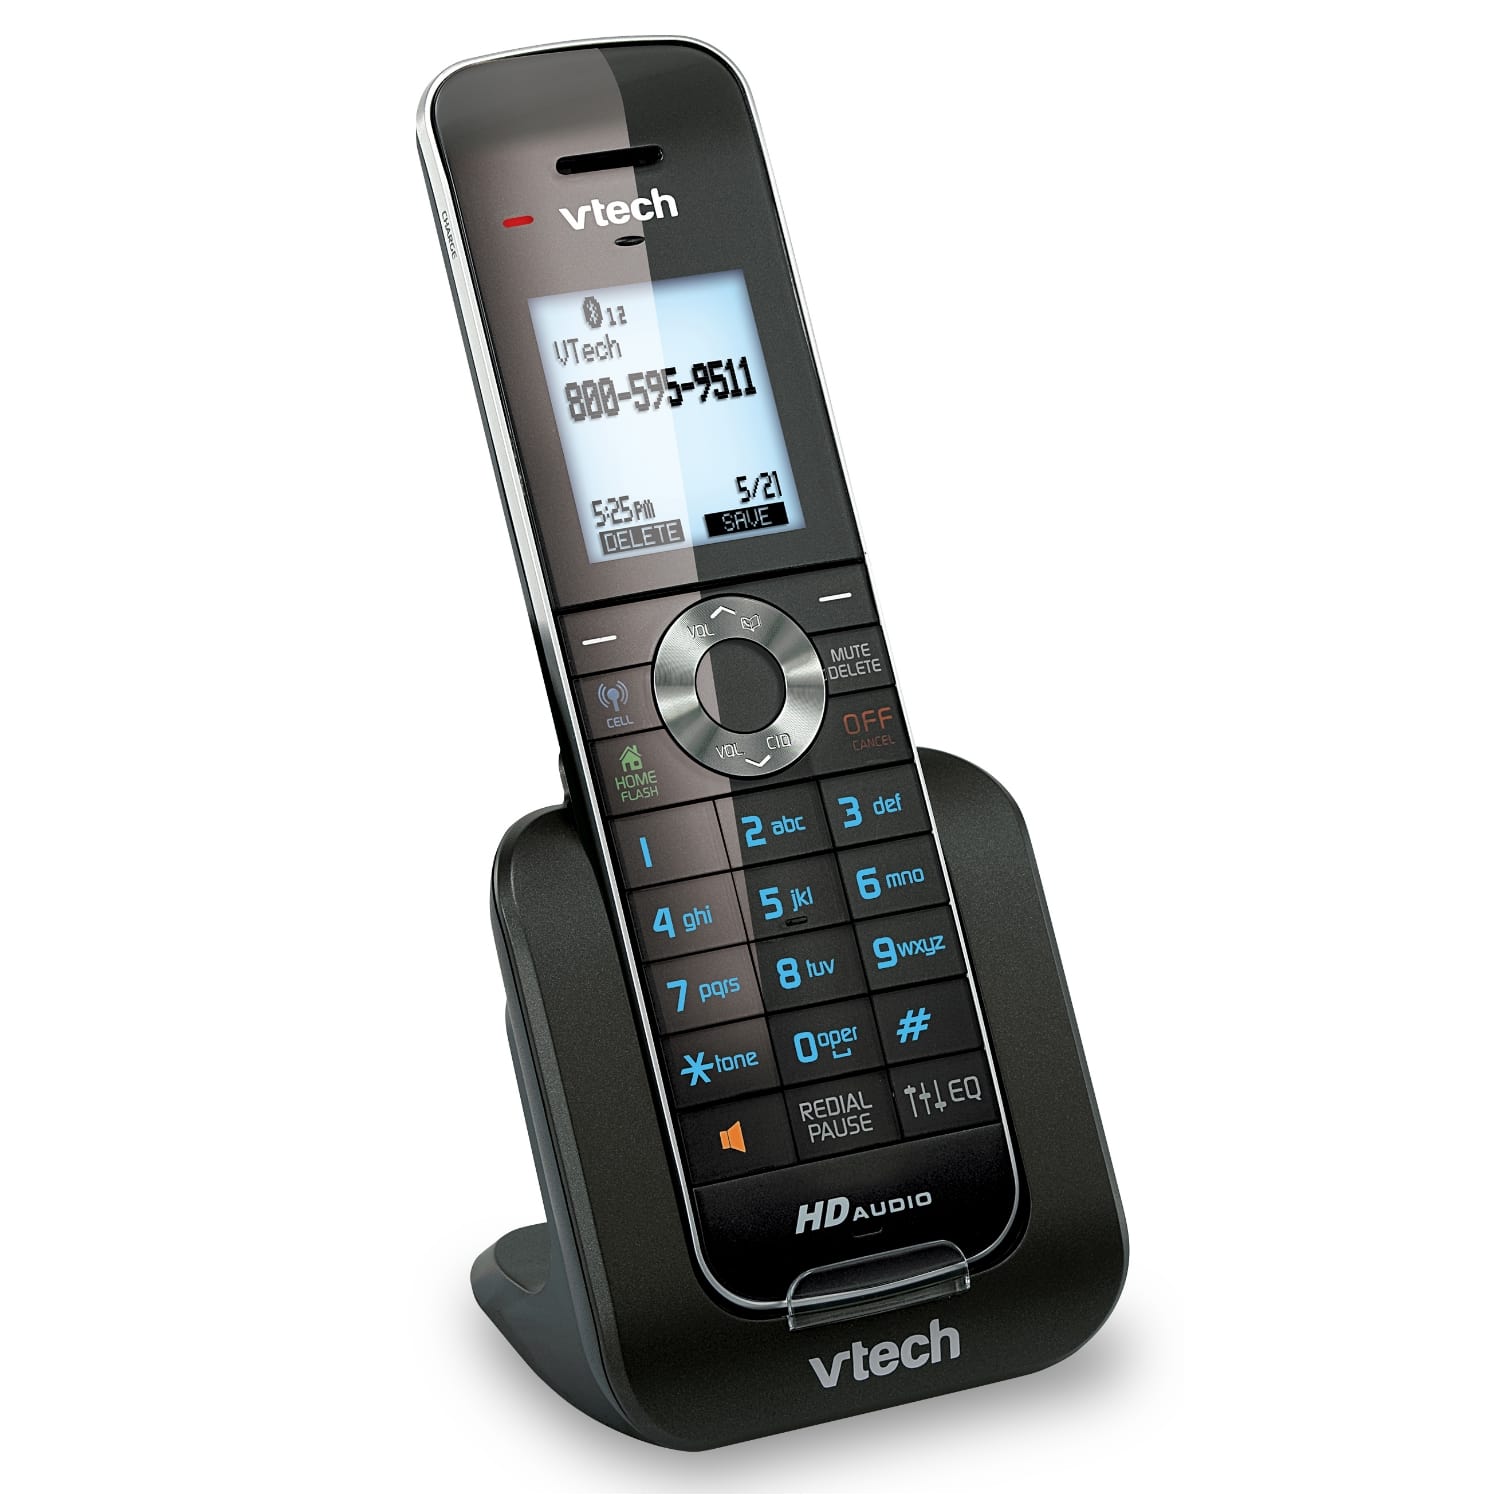 4 Handset Connect to Cell™ Phone System with Cordless Headset - view 7